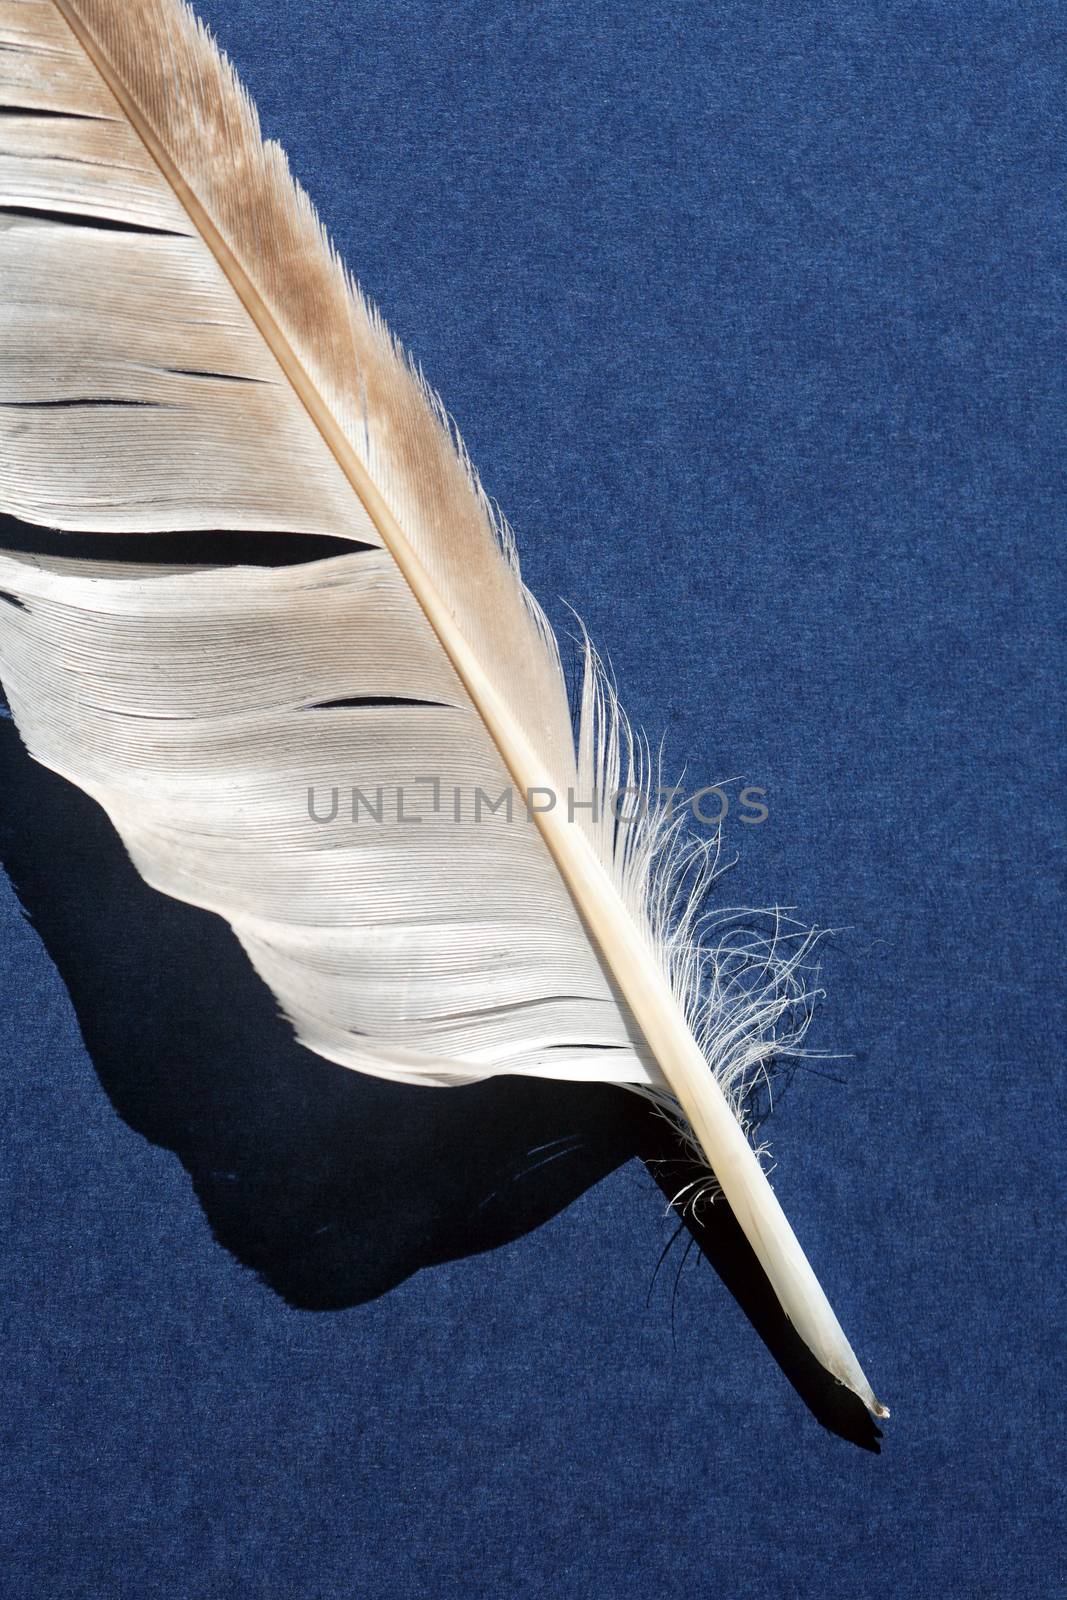 Feather On Blue by kvkirillov